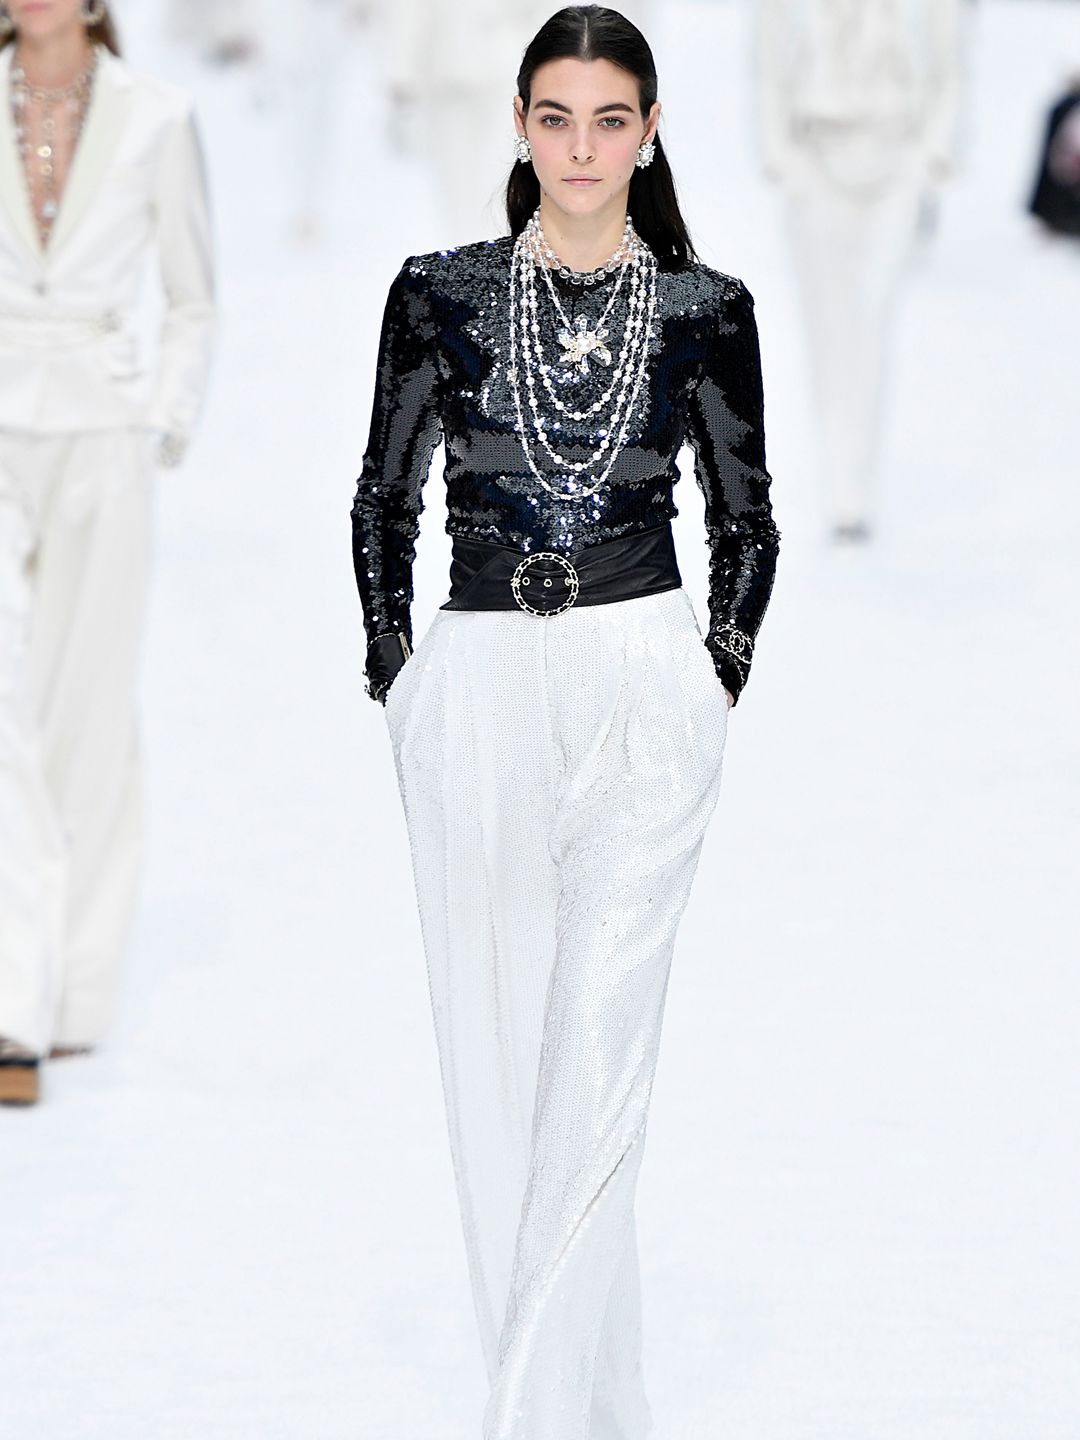 Vittoria Ceretti walks the runway during the Chanel Ready to Wear show on March 5, 2019